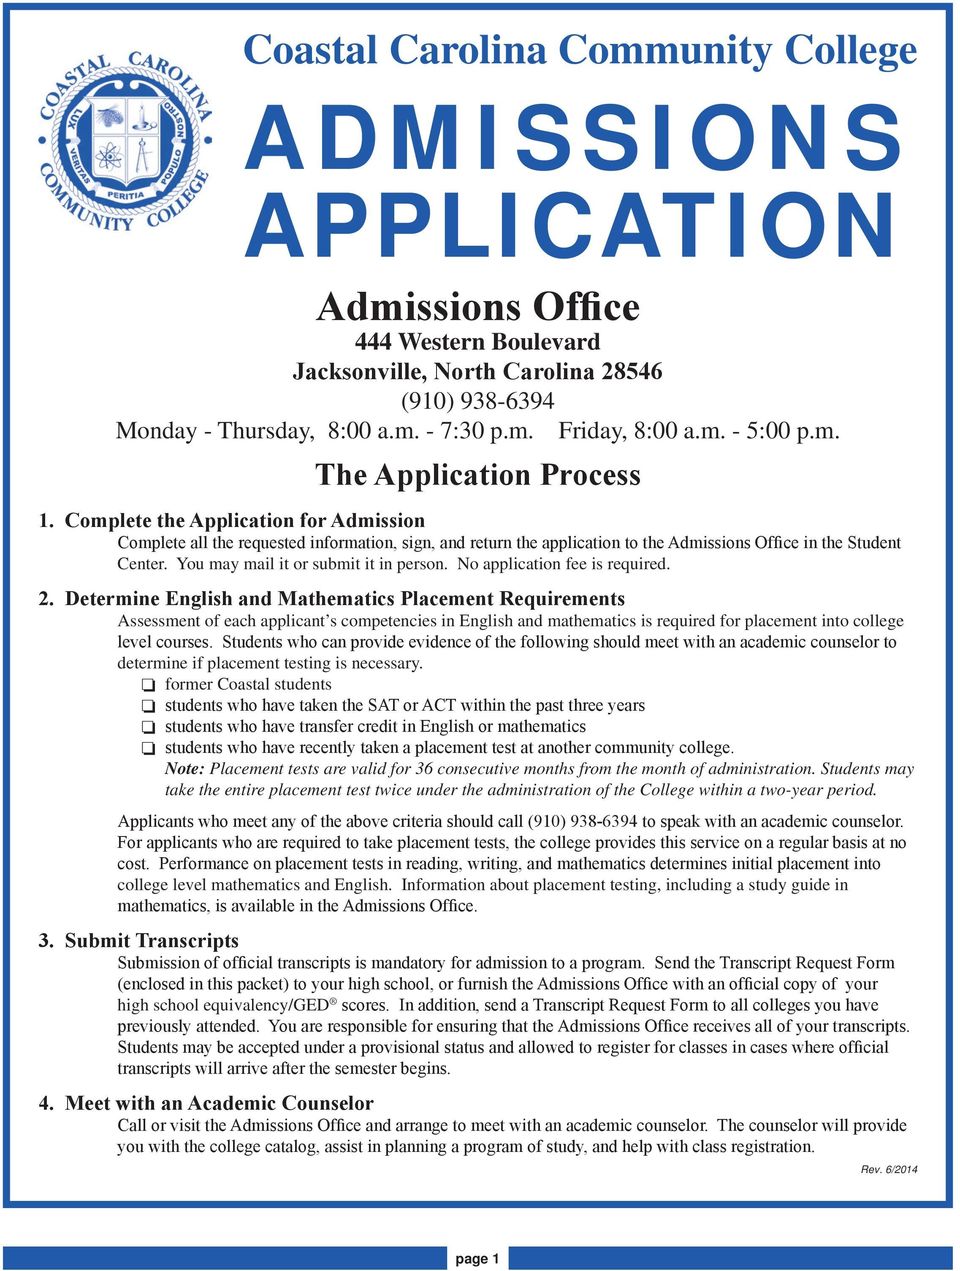 Complete the Application for Admission Complete all the requested information, sign, and return the application to the Admissions Office in the Student Center. You may mail it or submit it in person.